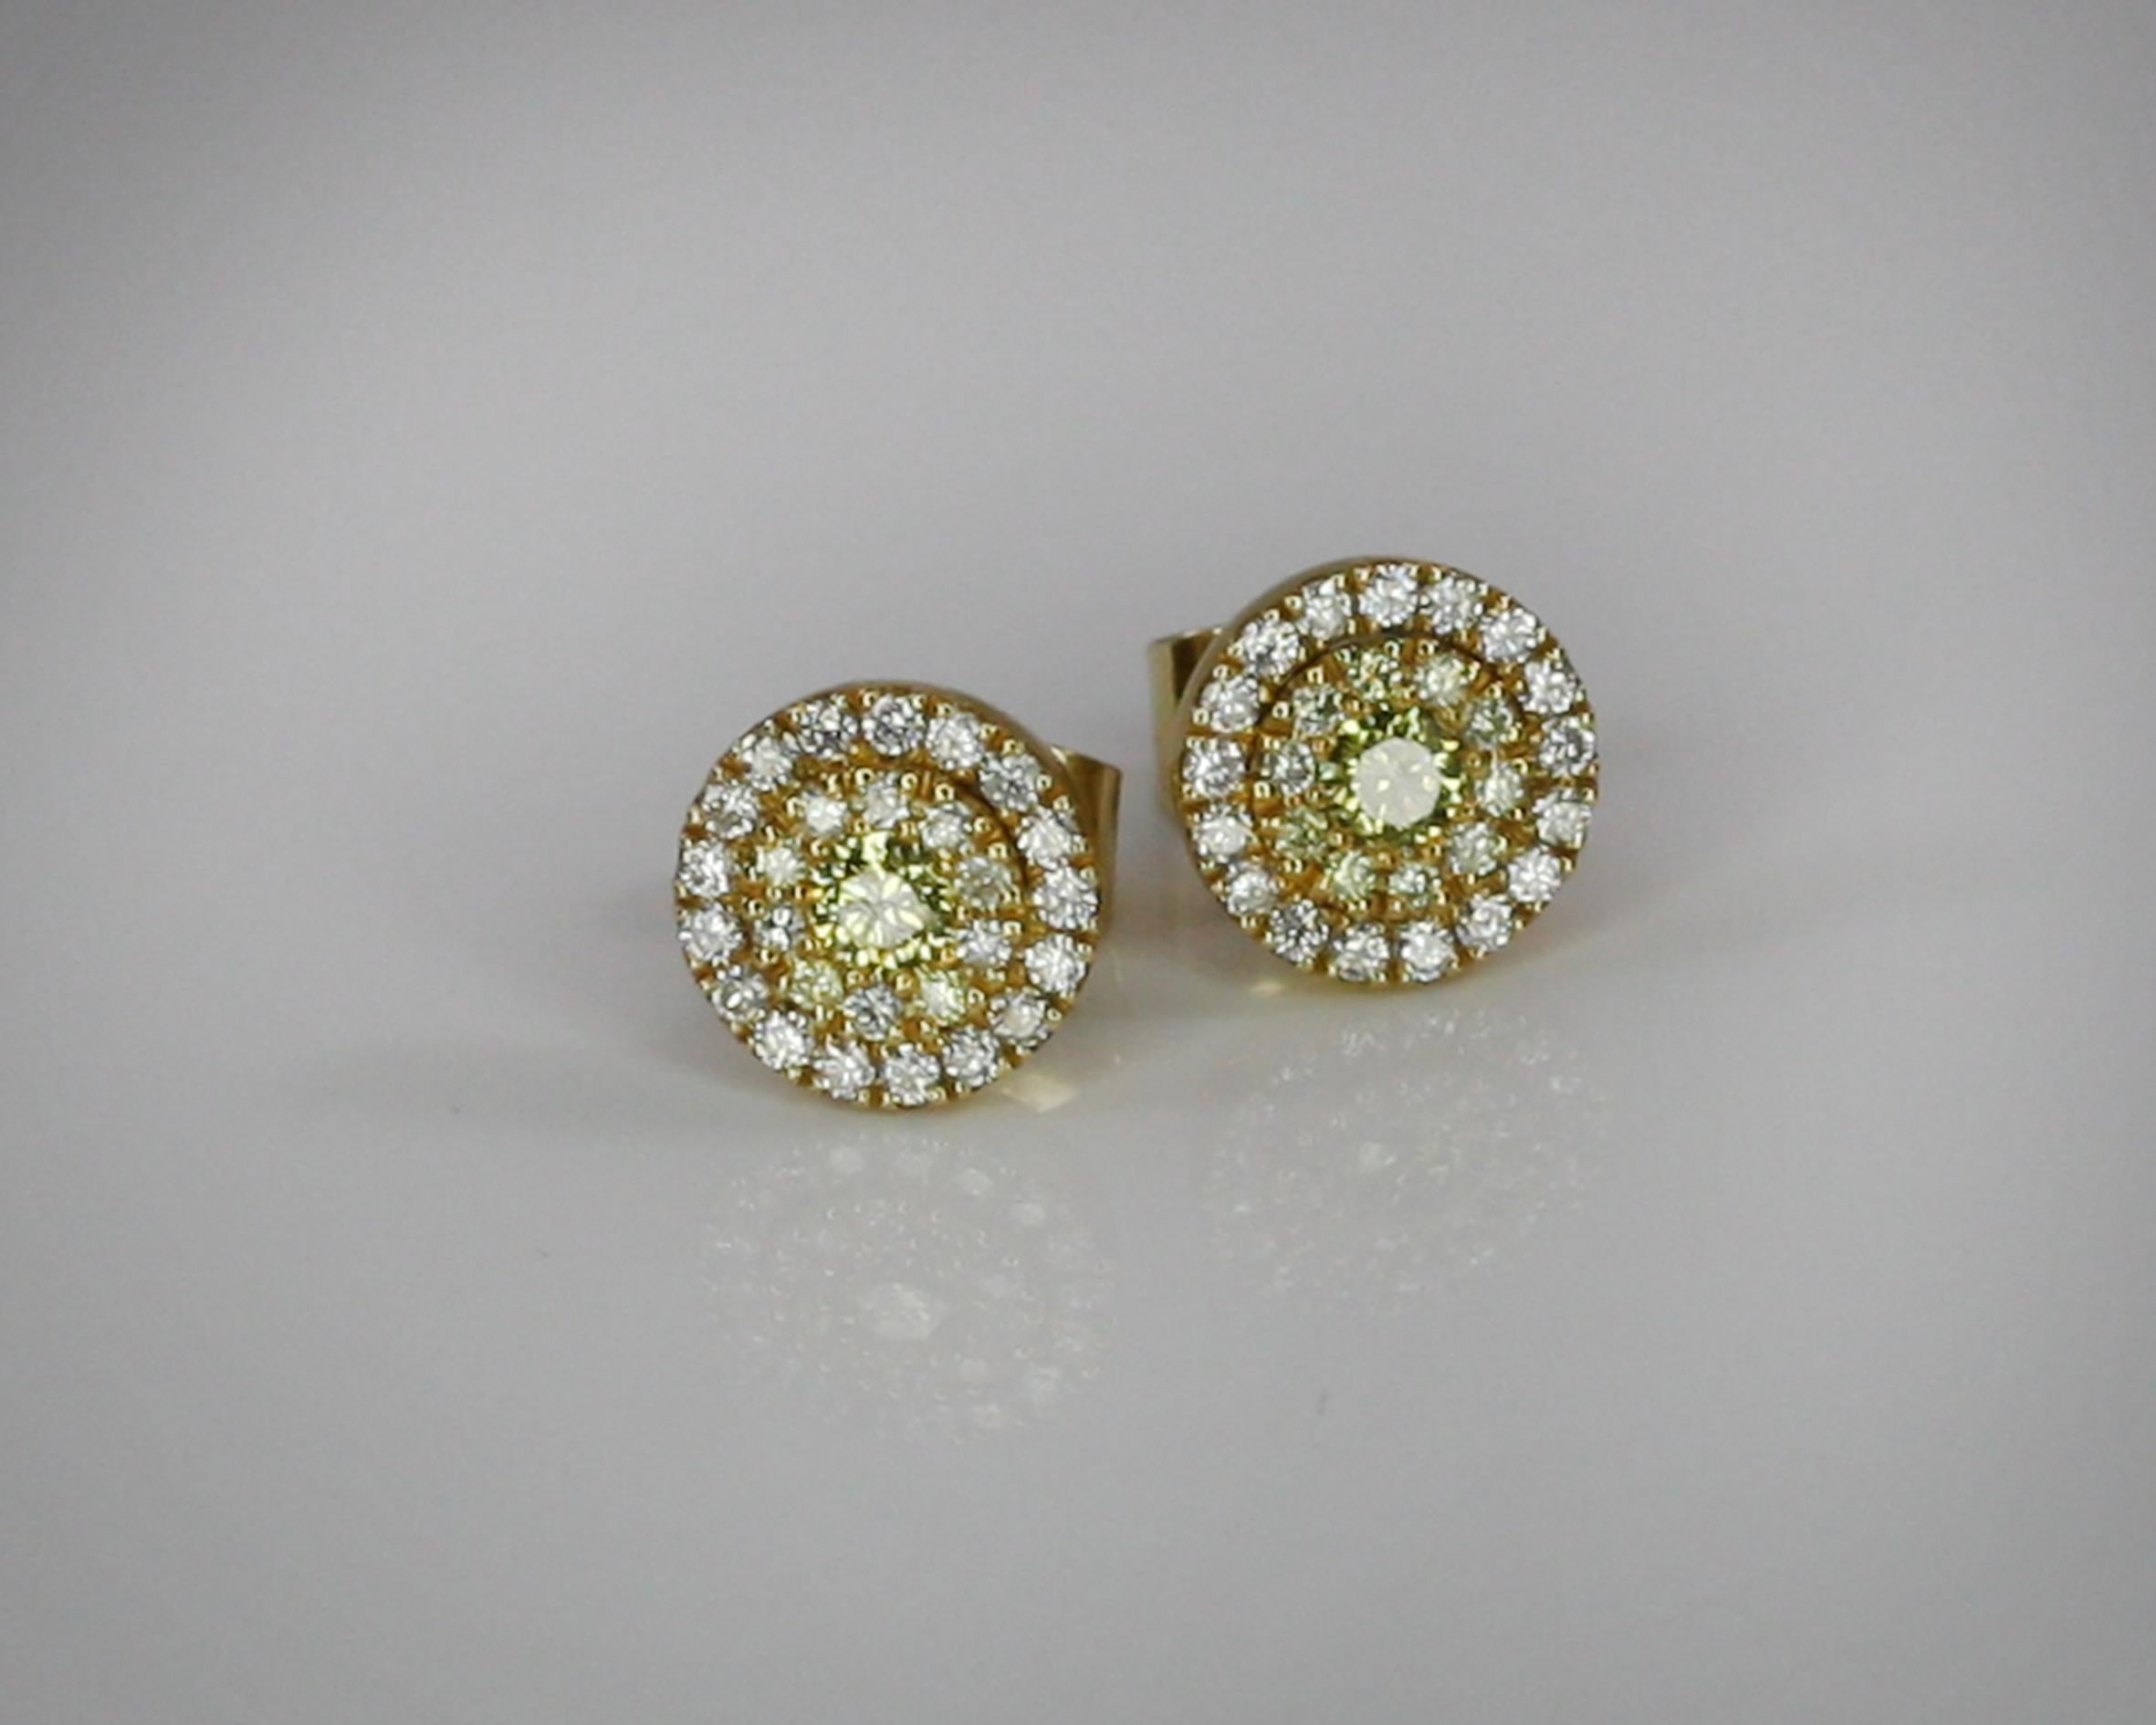 These S.Georgios designer stud earrings are hand made from 18 Karat Yellow Gold to create a classic and elegant look. These beautiful earrings feature in the center 2 brilliant-cut natural yellow Diamonds with a weight of 0.20 Carat, encircled in a